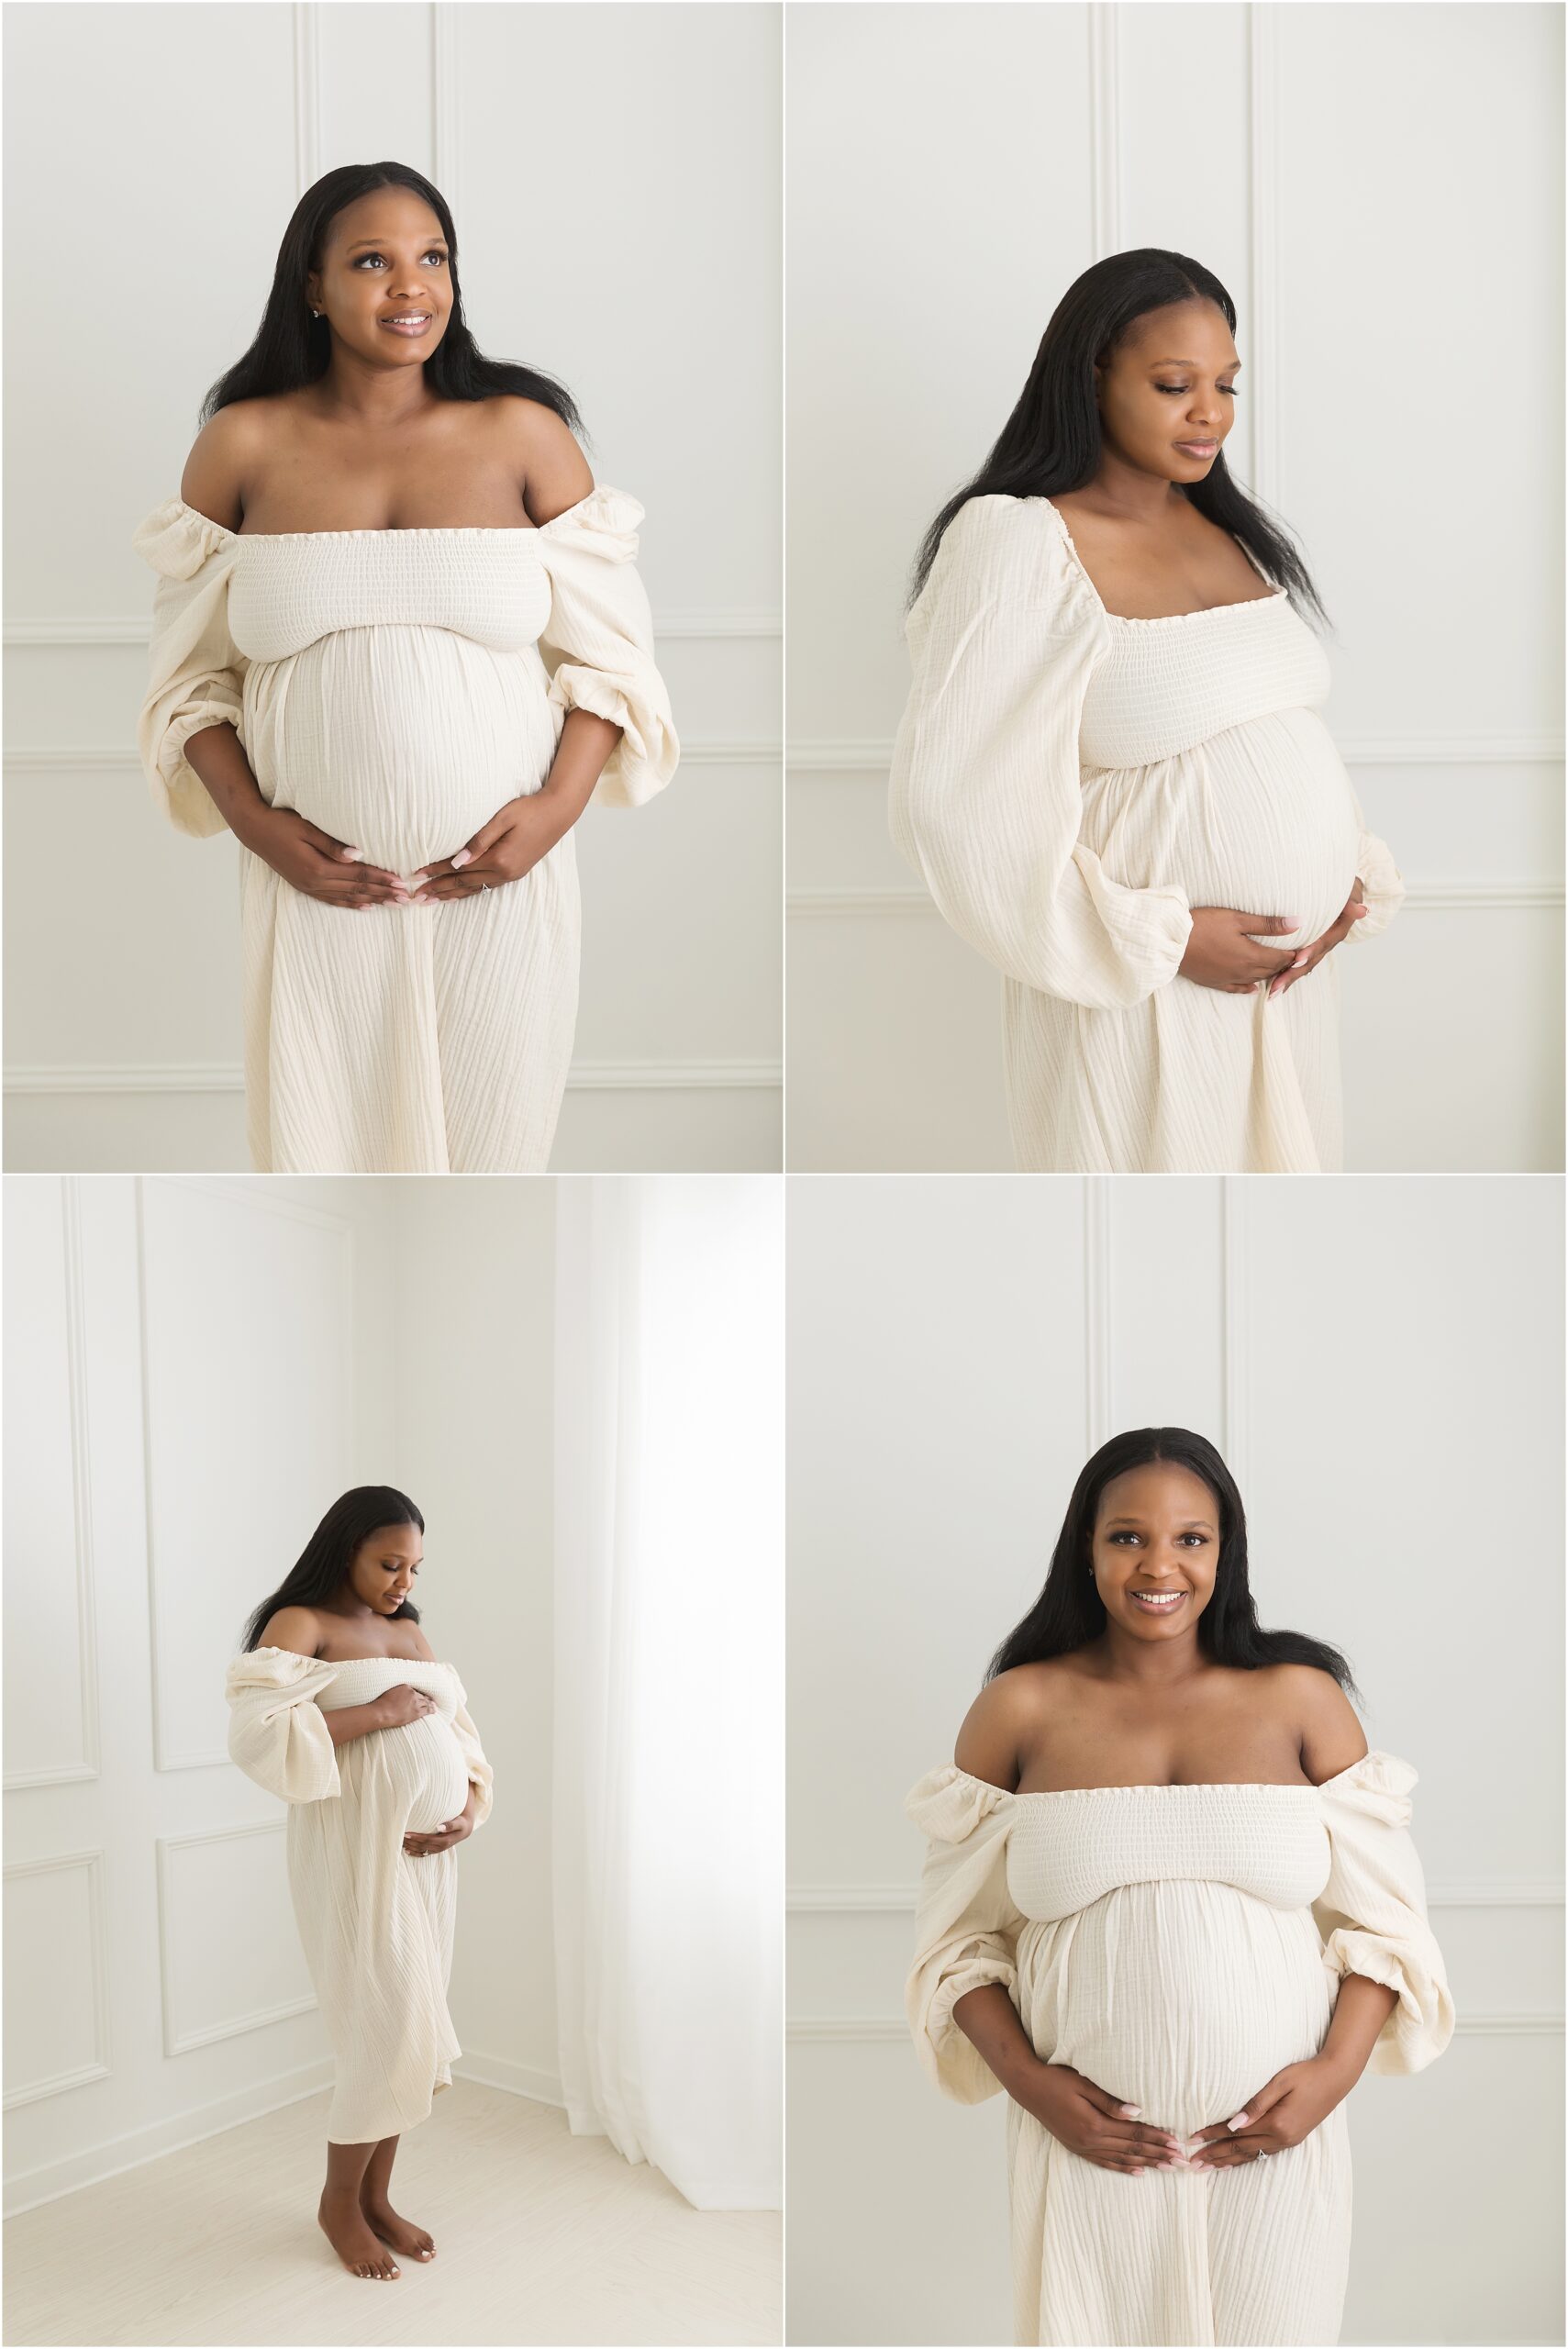 Beautiful Black woman poses for pregnancy photos